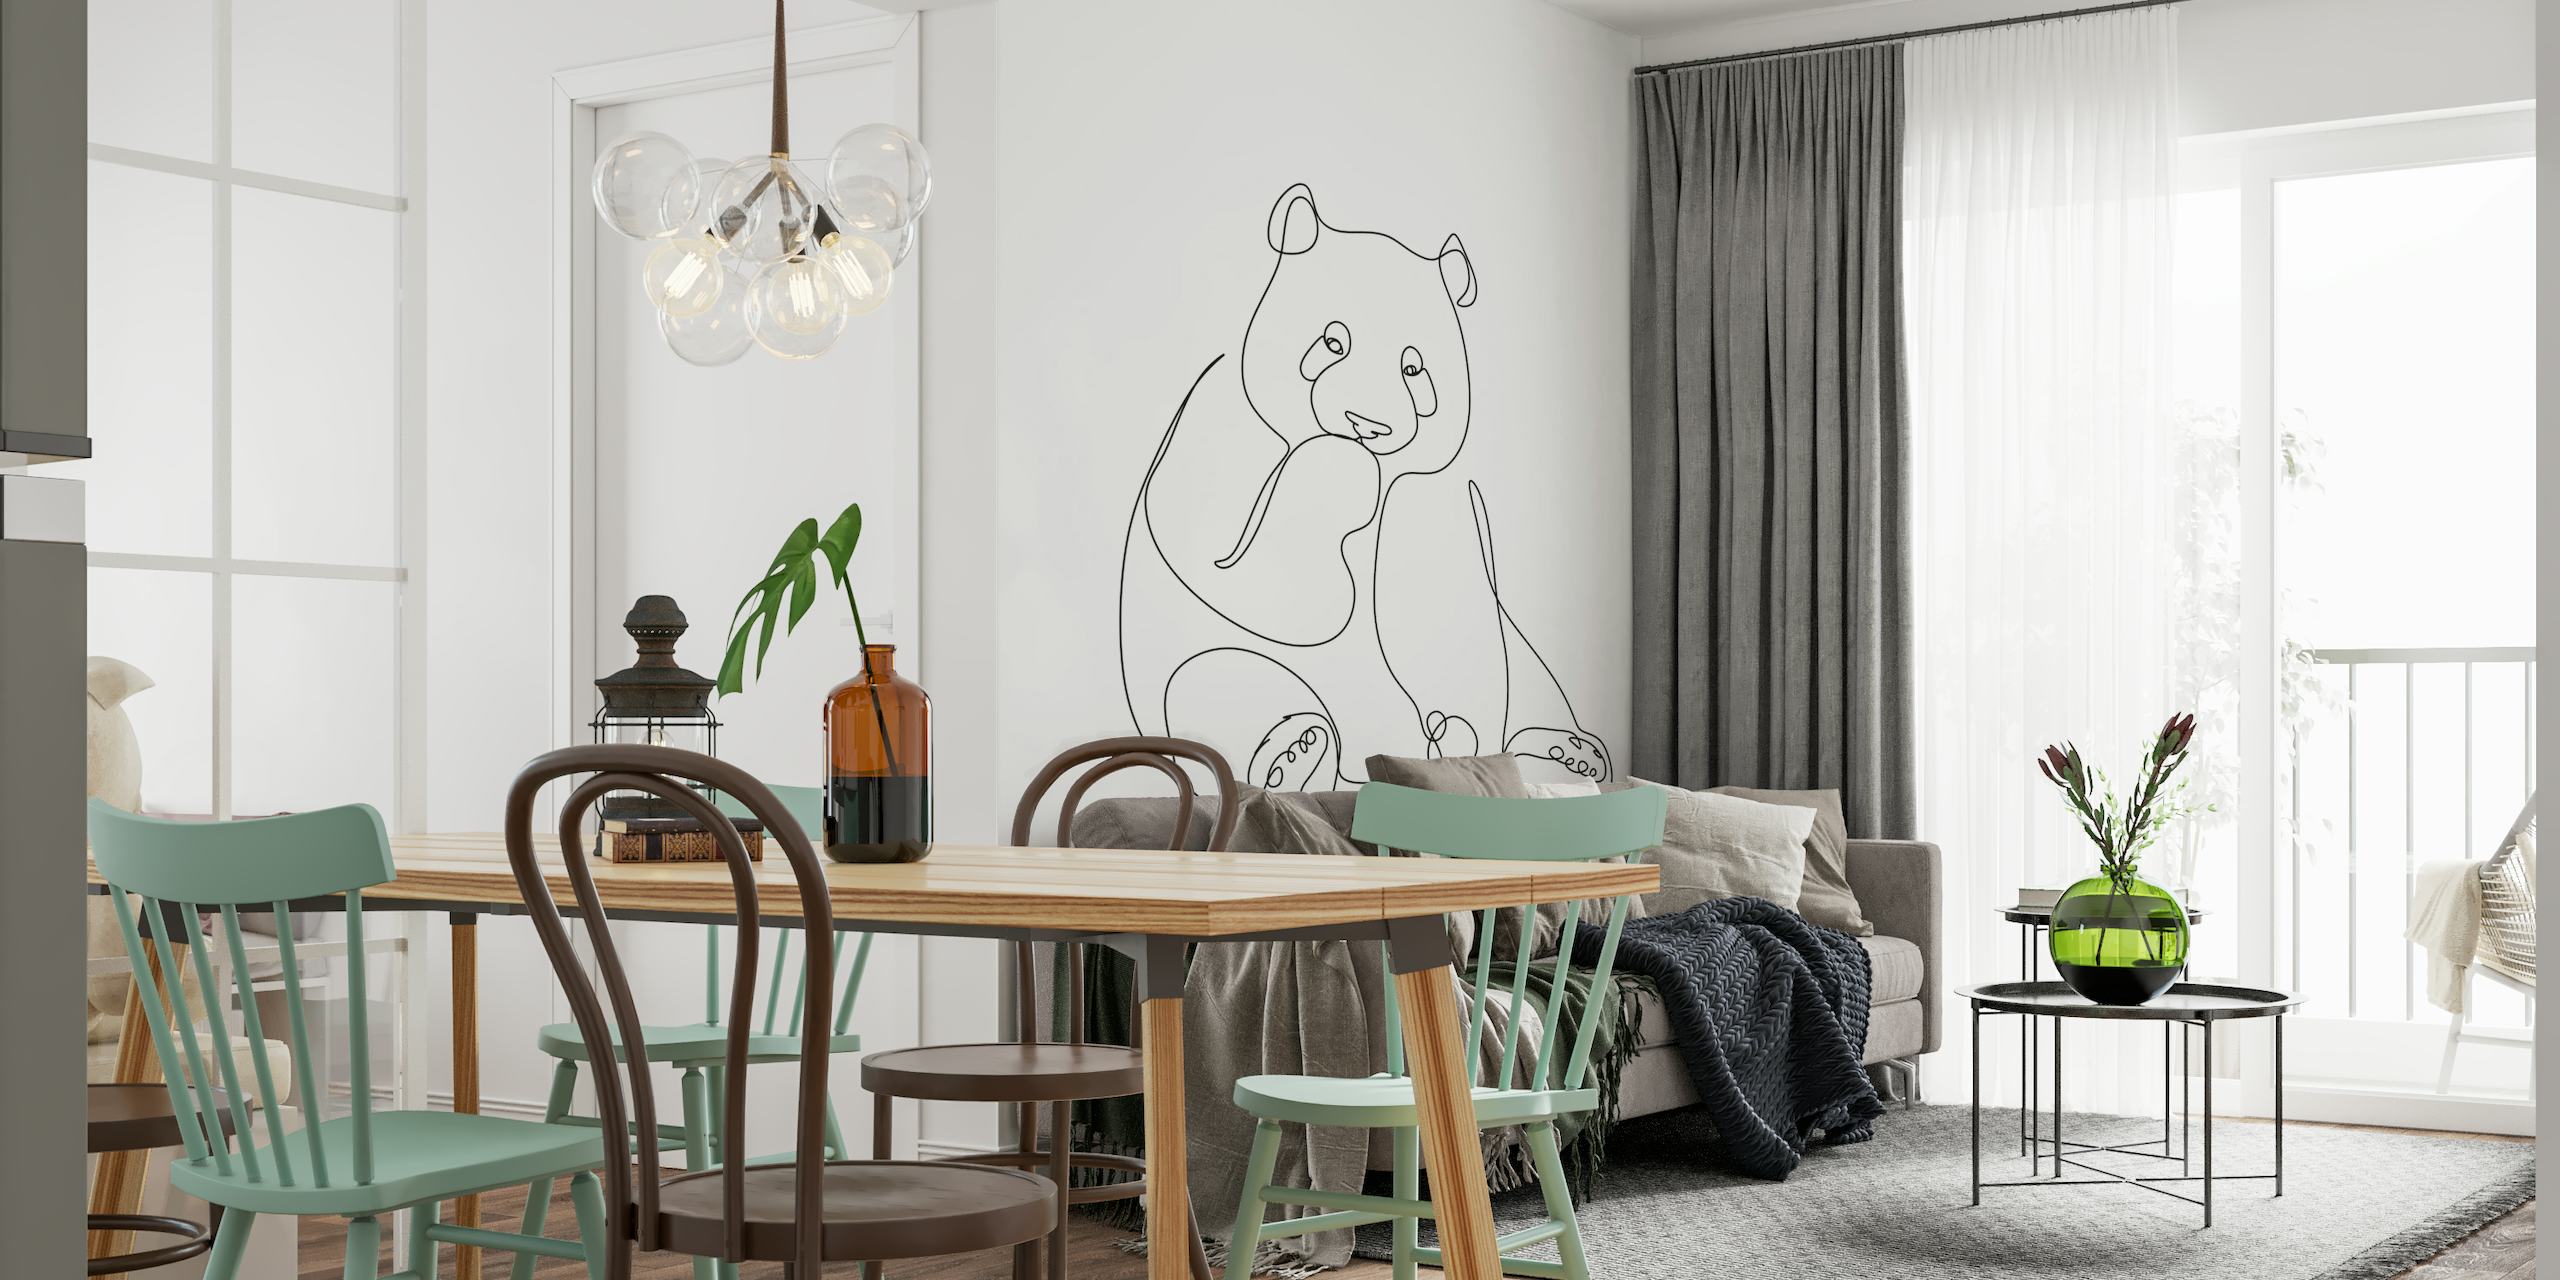 One line drawing of a panda wall mural from Happywall